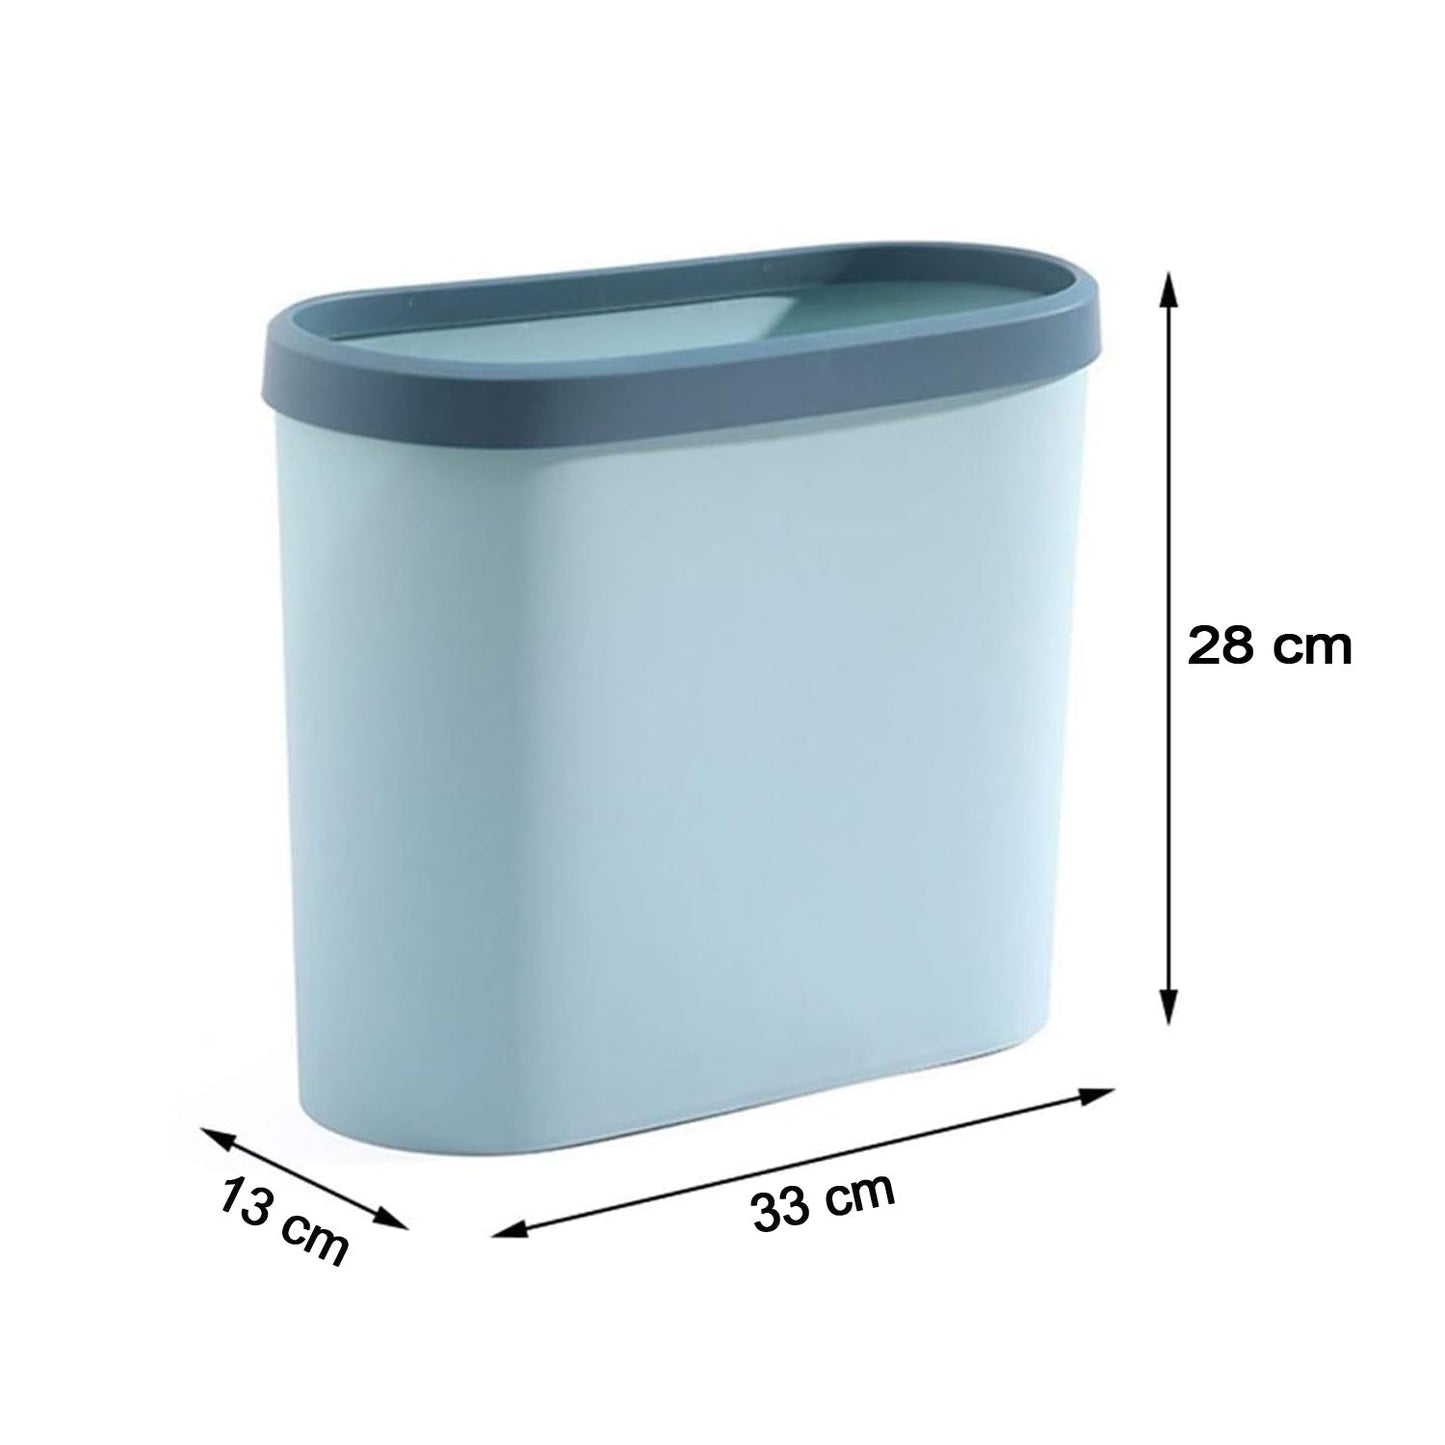 Plastic Open Dustbin Without Lid | Storage Box & Garbage Bin For Home, Kitchen, Office Use Dustbin